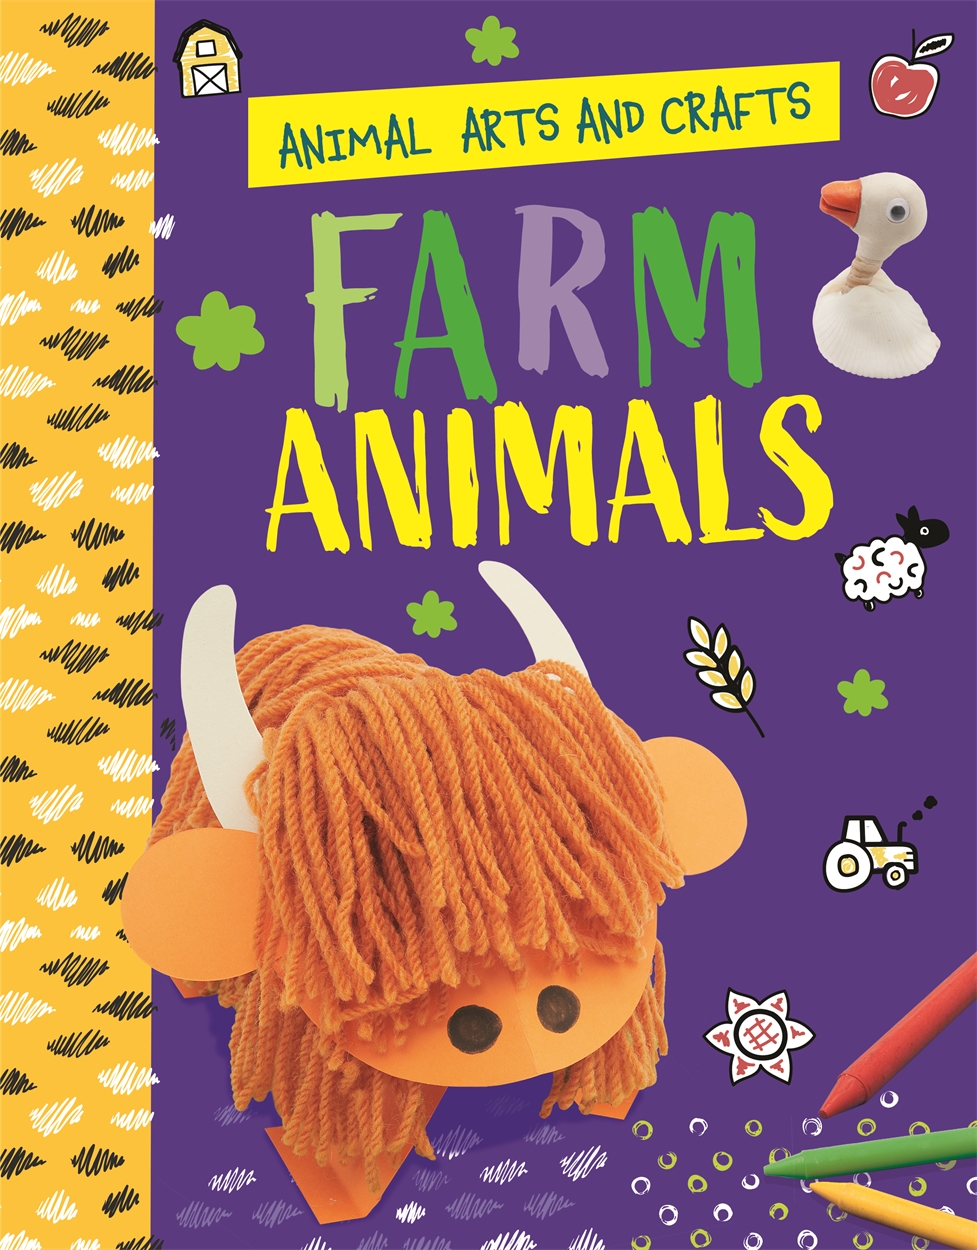 Animal Arts and Crafts: Farm Animals by Annalees Lim | Hachette UK